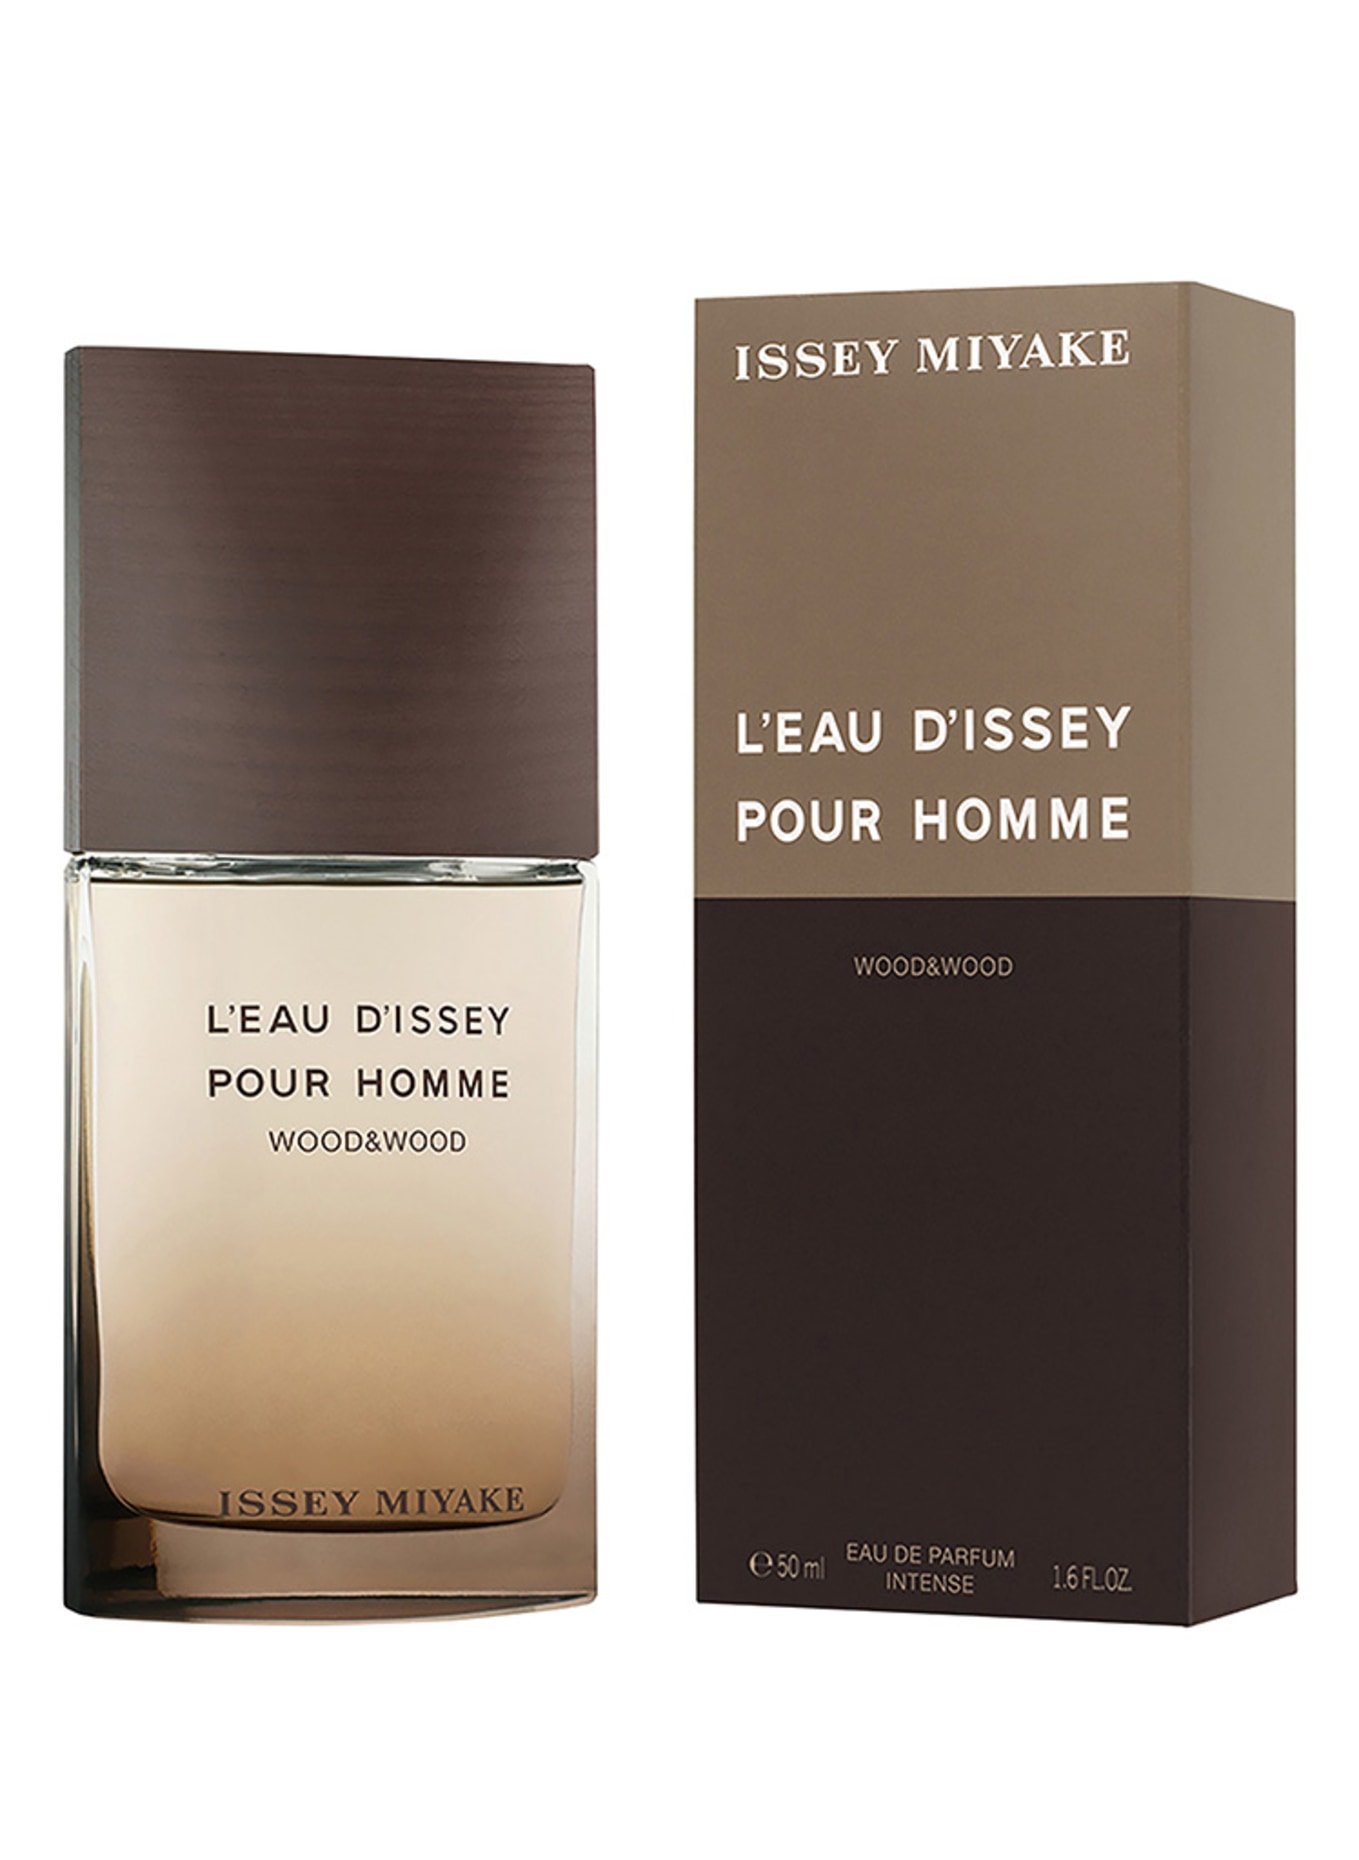 ISSEY MIYAKE L'EAU D'ISSEY POUR HOMME WOOD&WOOD (Obrazek 2)